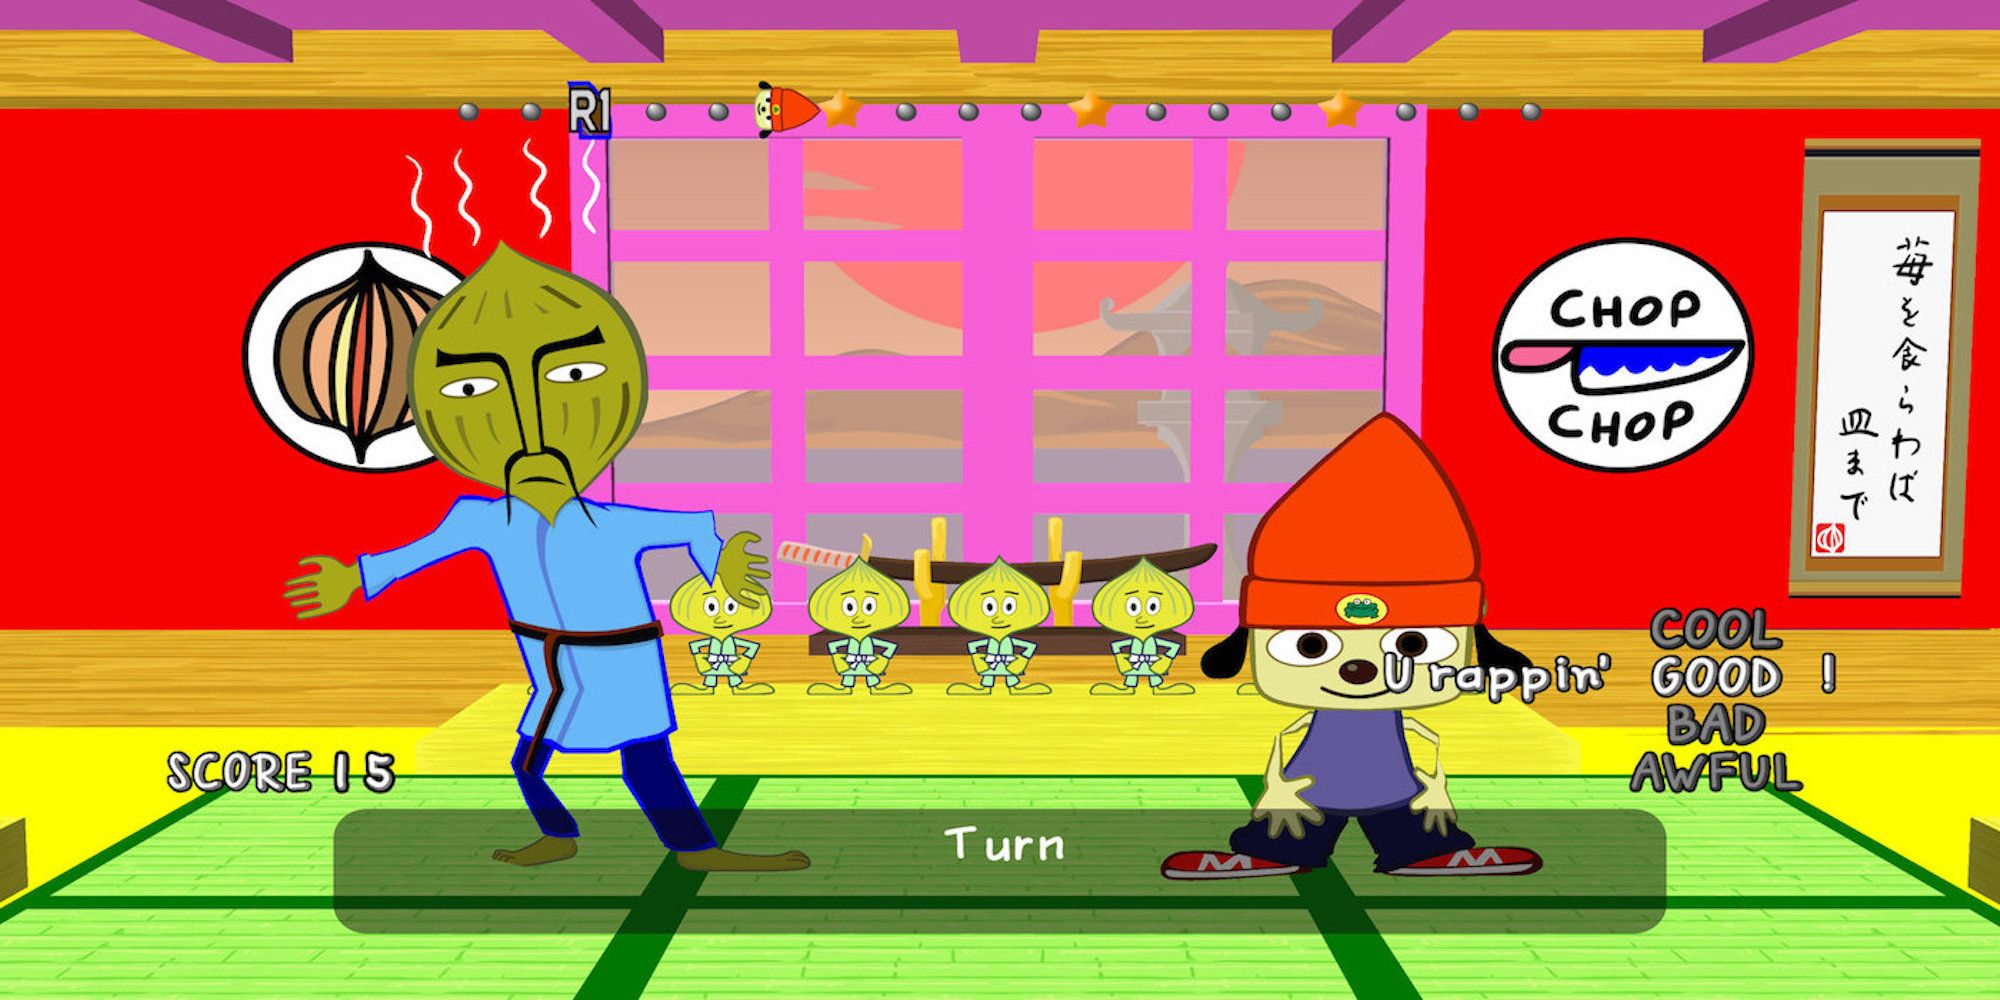 Playing through a song in PaRappa The Rapper Remastered